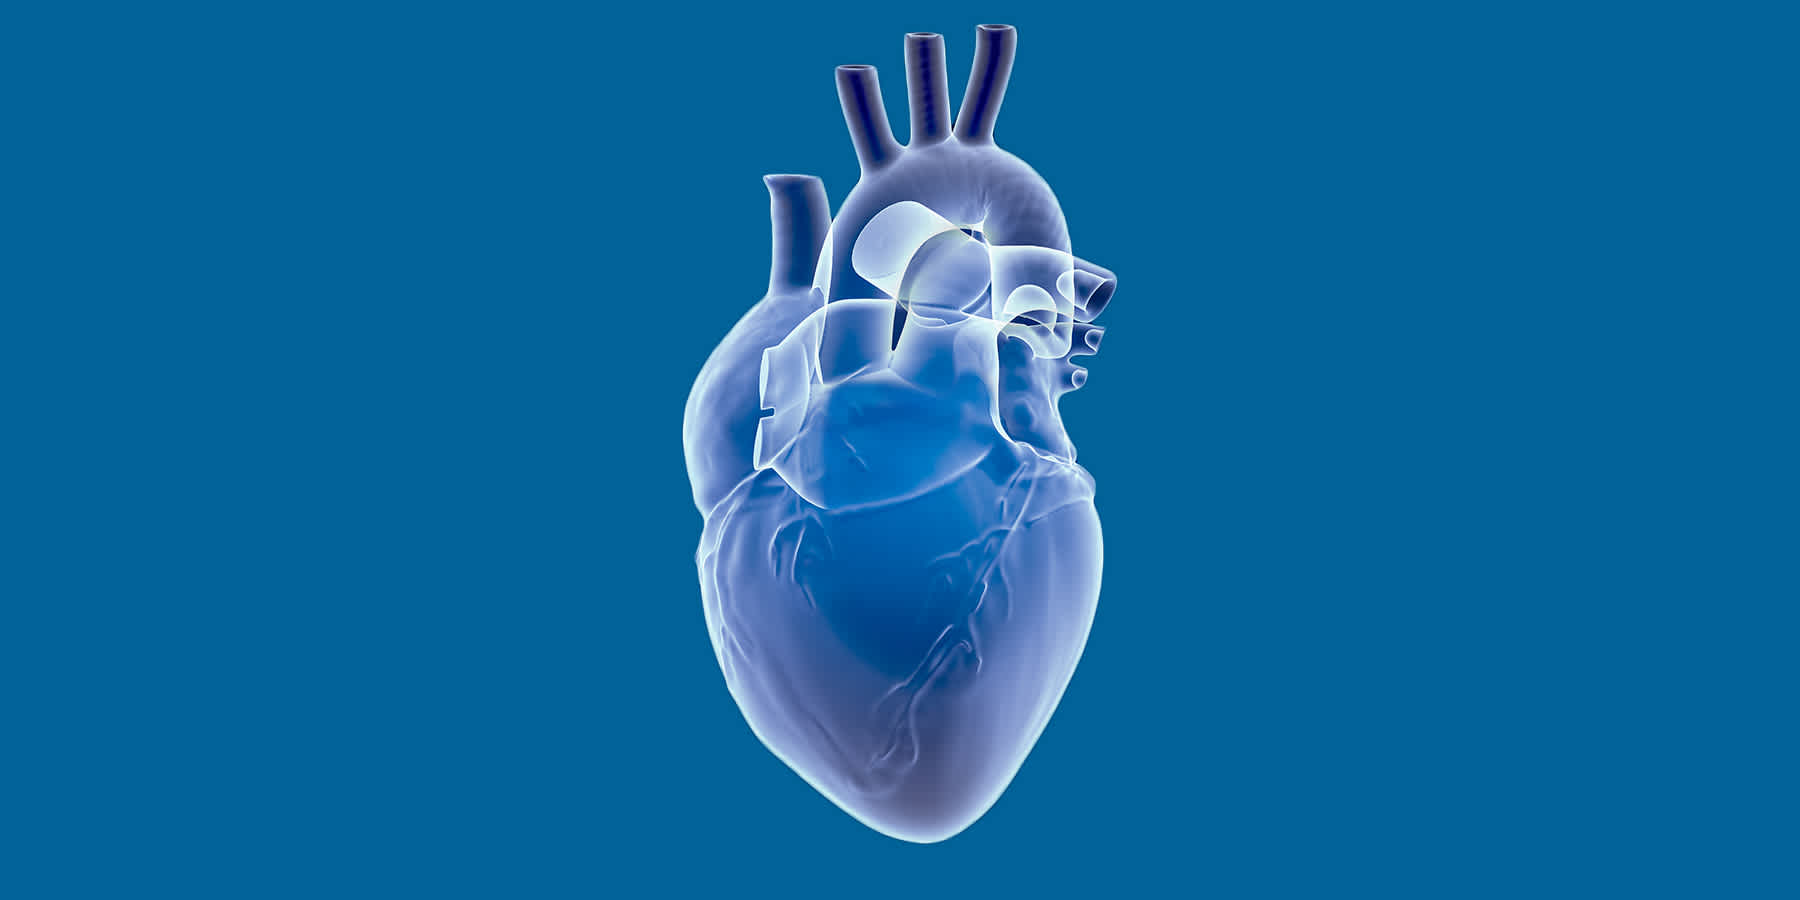 Illustration of anatomical heart against blue background to represent the heart after endocarditis treatment